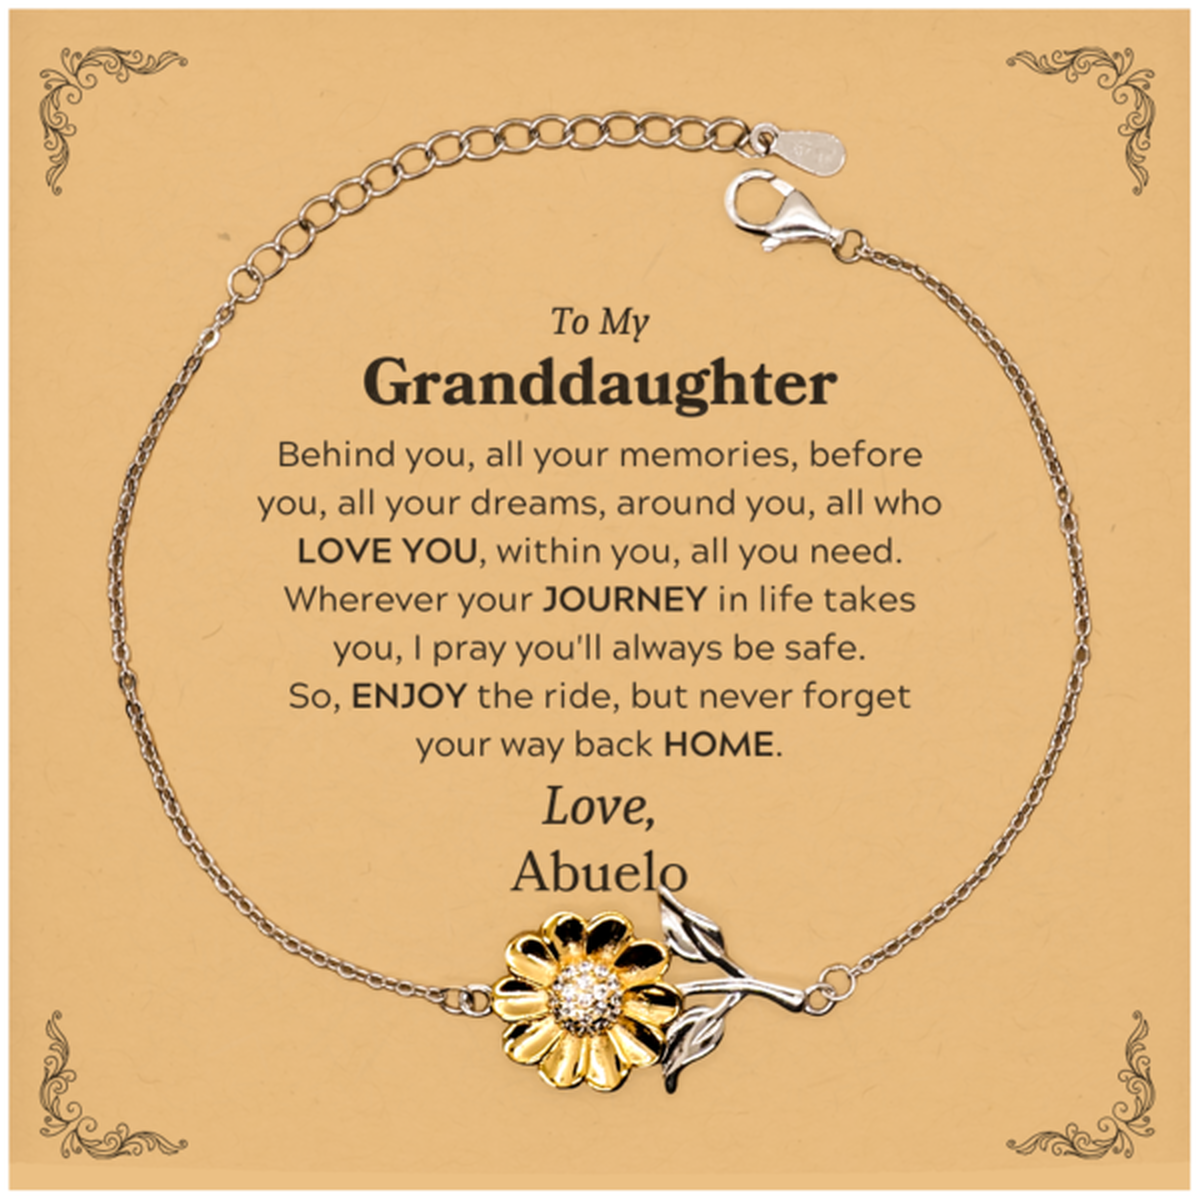 To My Granddaughter Graduation Gifts from Abuelo, Granddaughter Sunflower Bracelet Christmas Birthday Gifts for Granddaughter Behind you, all your memories, before you, all your dreams. Love, Abuelo